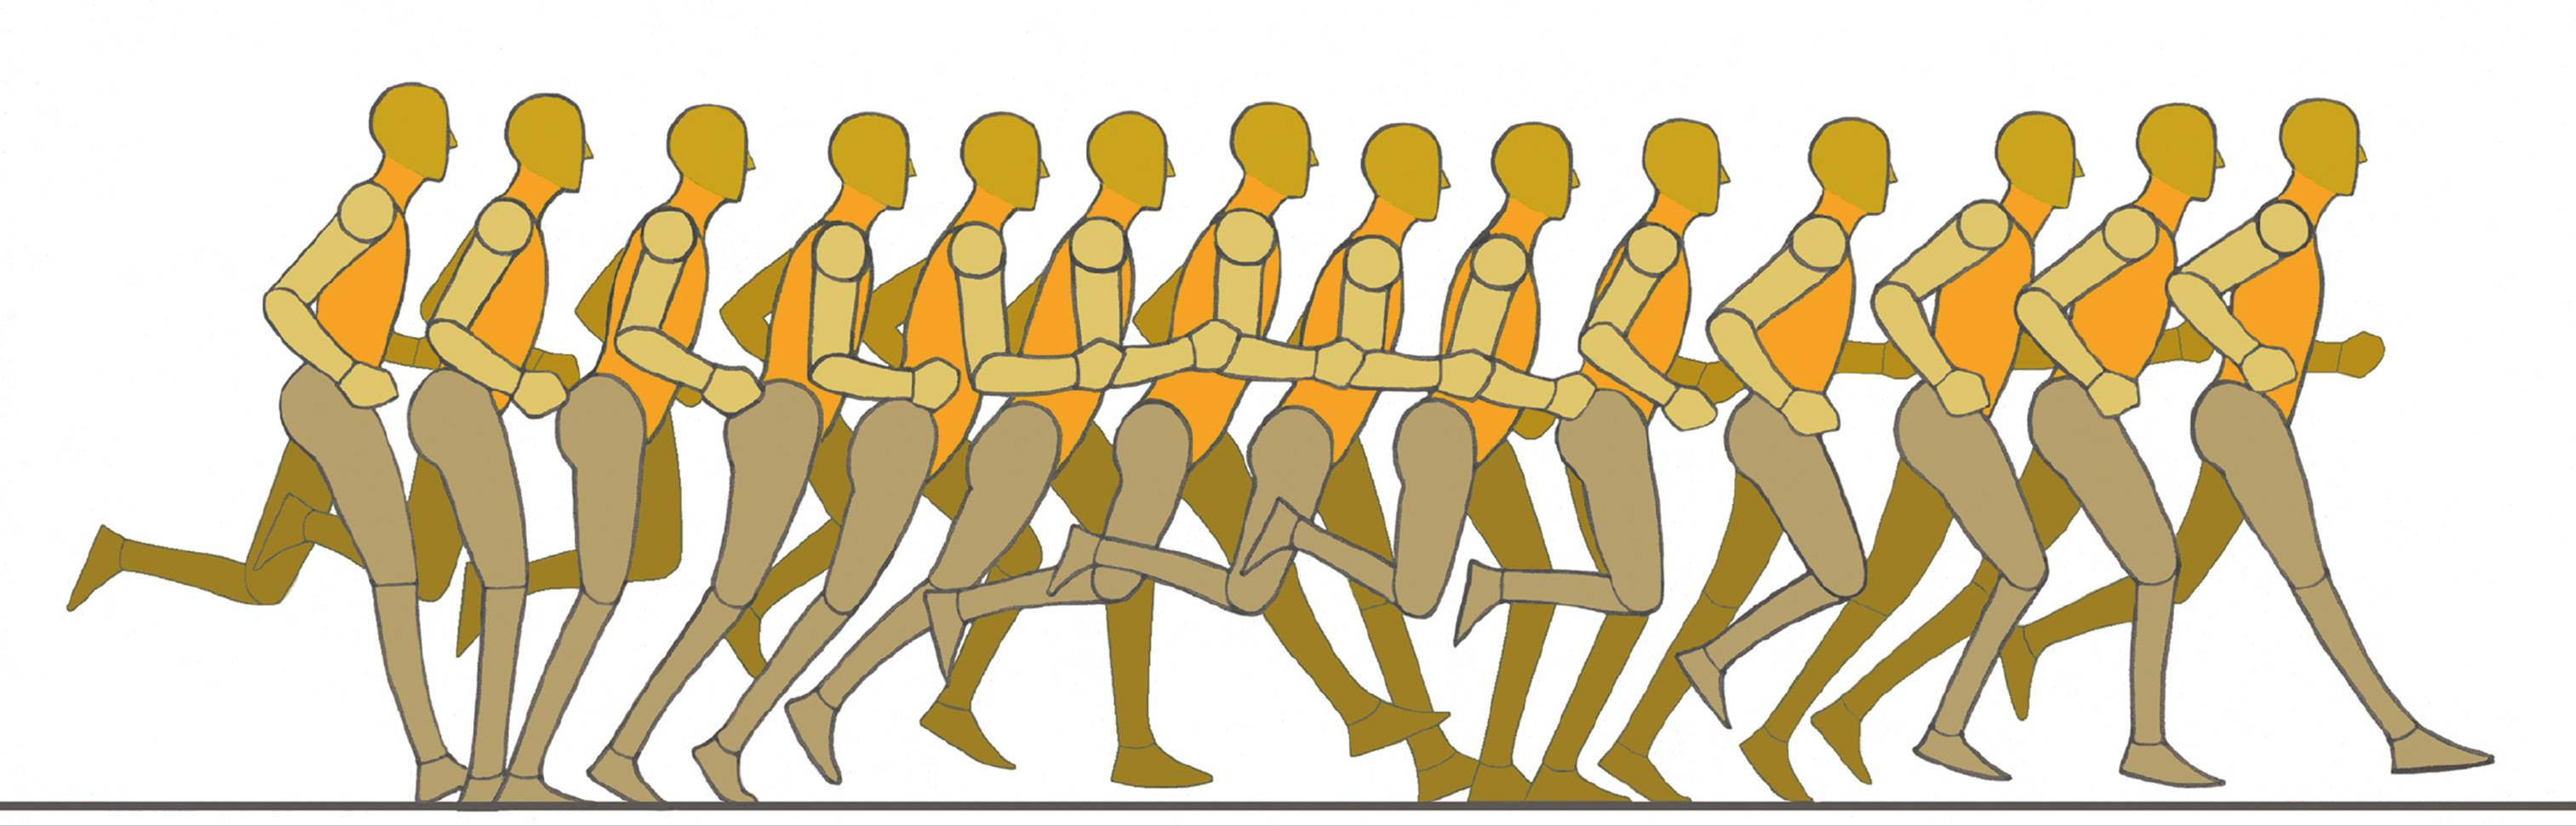 Класс human. Aforementioned Movement sequence. Human Movement Analysis. Linear Movement. The female Figure in Movement.